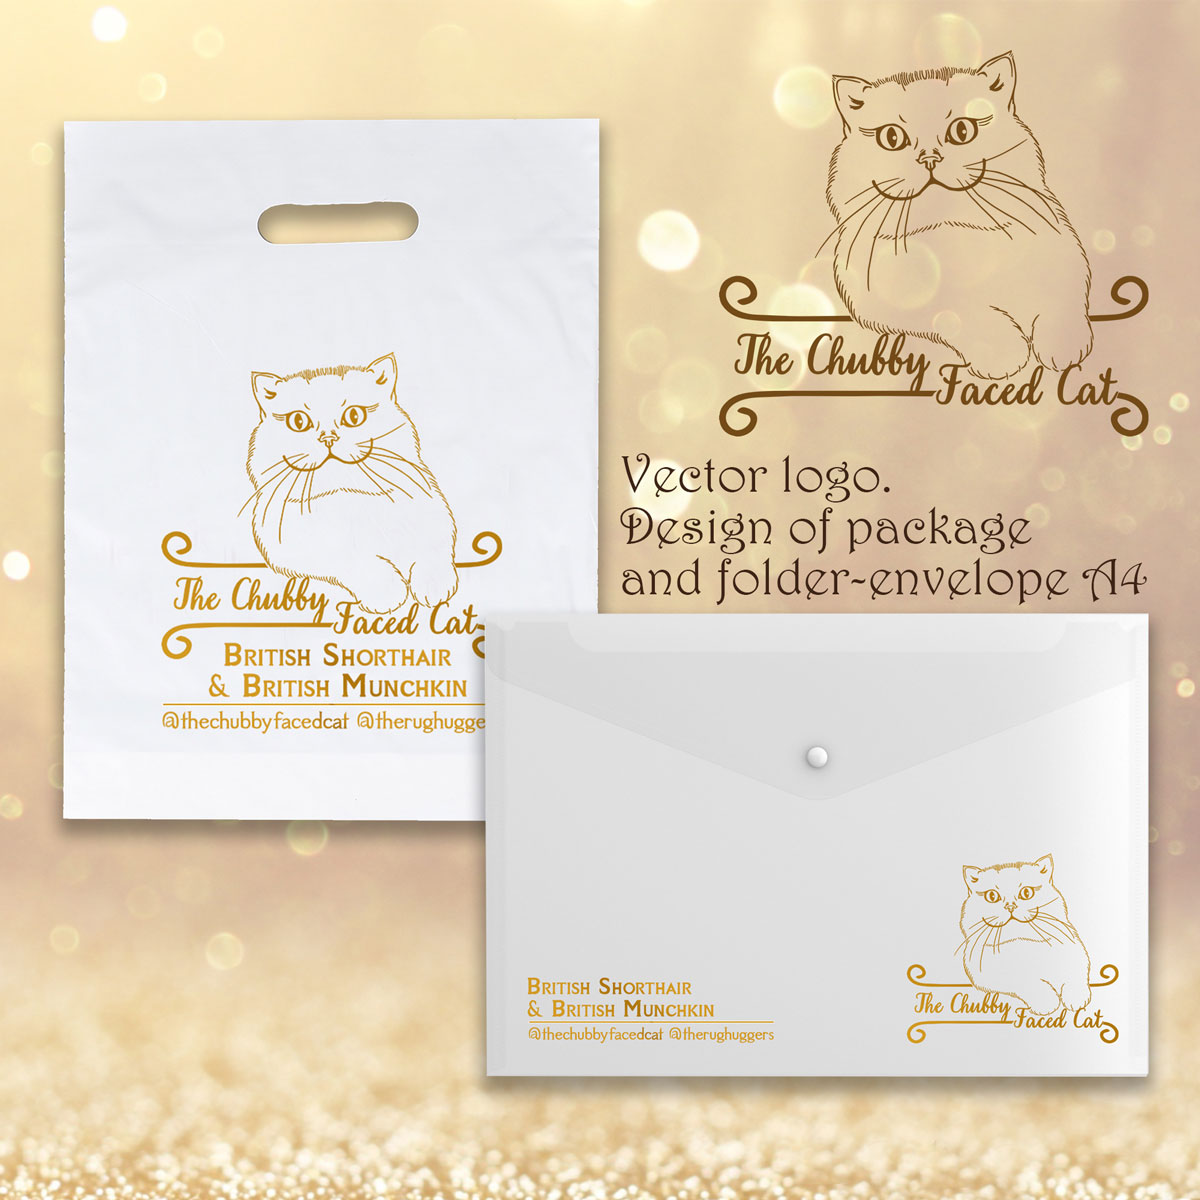 Folder for documents and a bag with the logo of the cattery of British cats